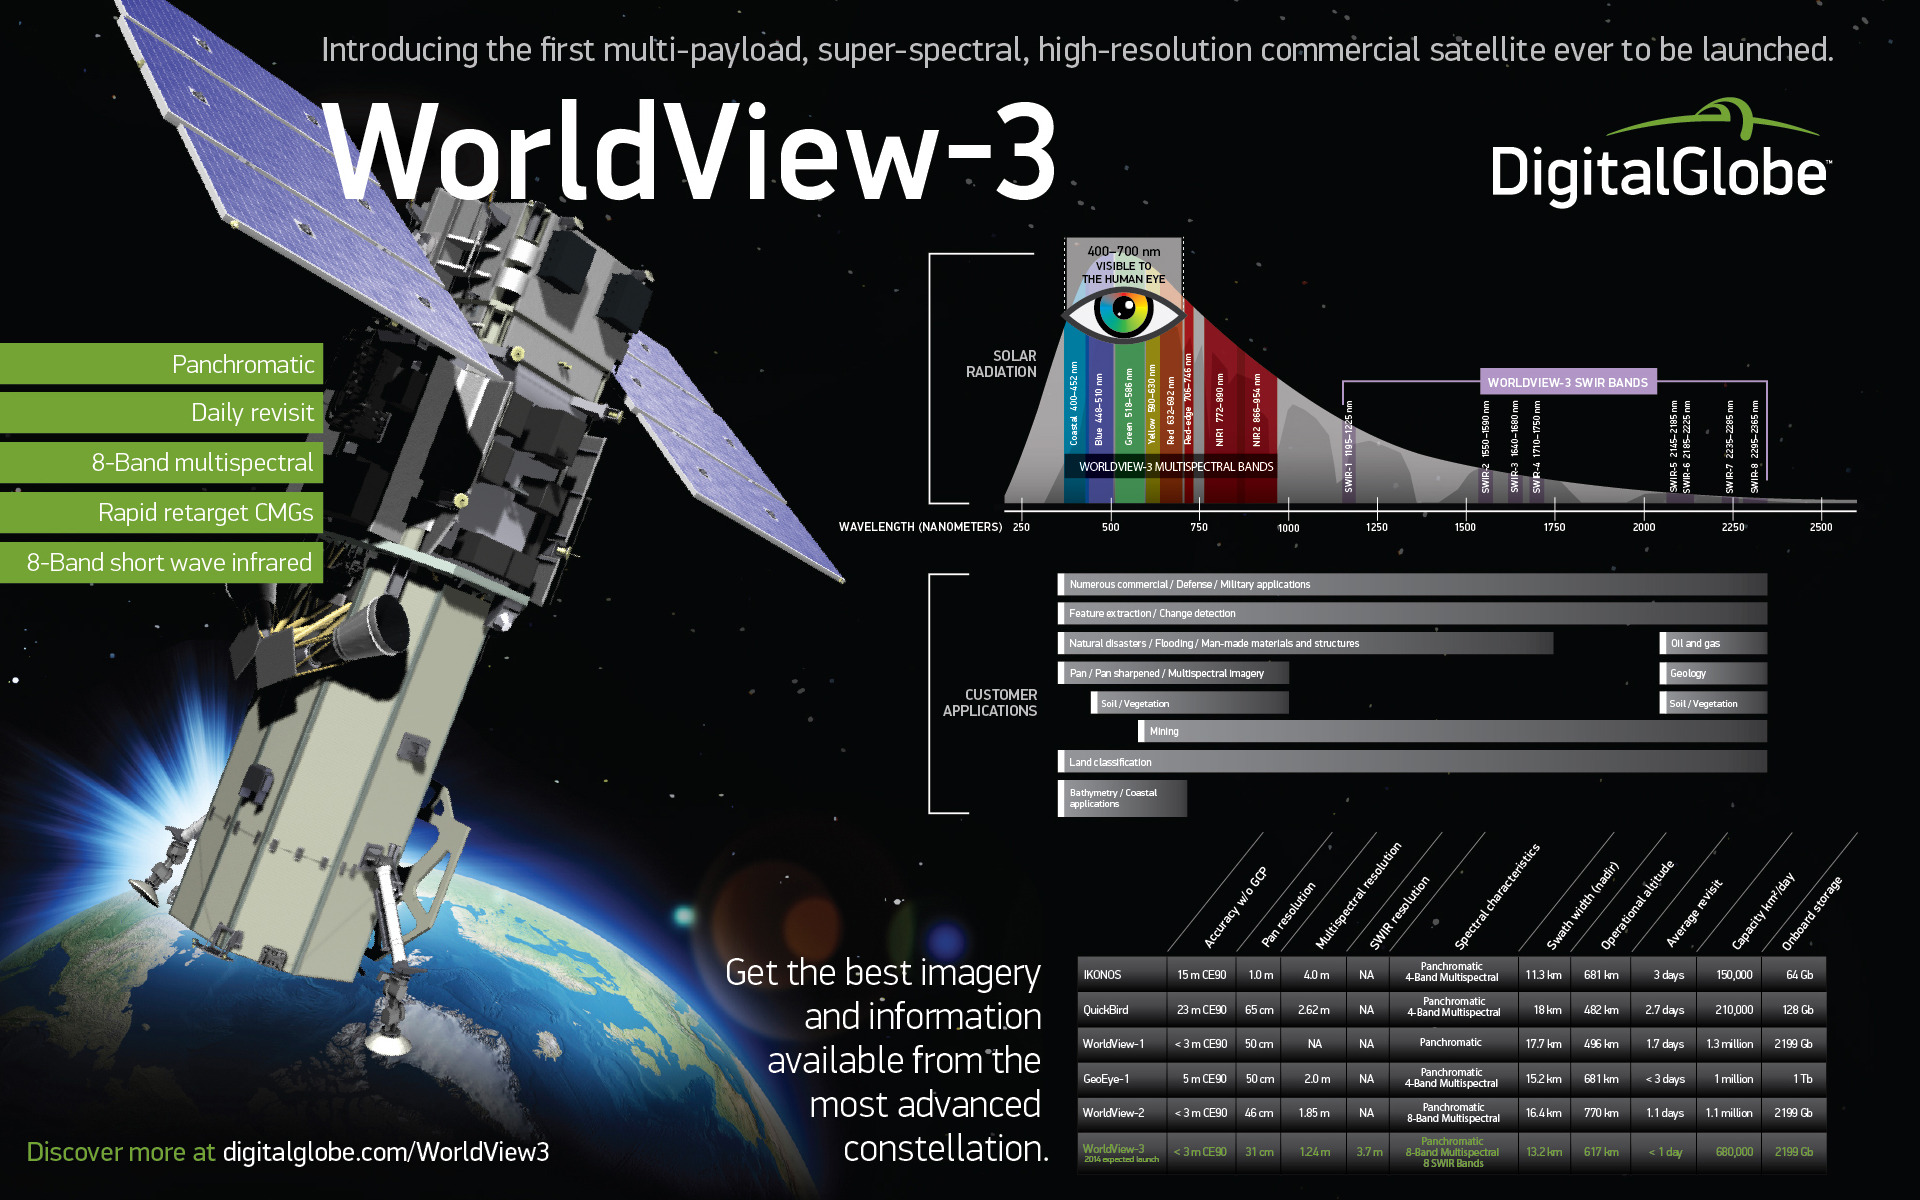 Comparative infographic of the capabilities of WorldView-3 and its siblings. Image Credit: DigitalGlobe